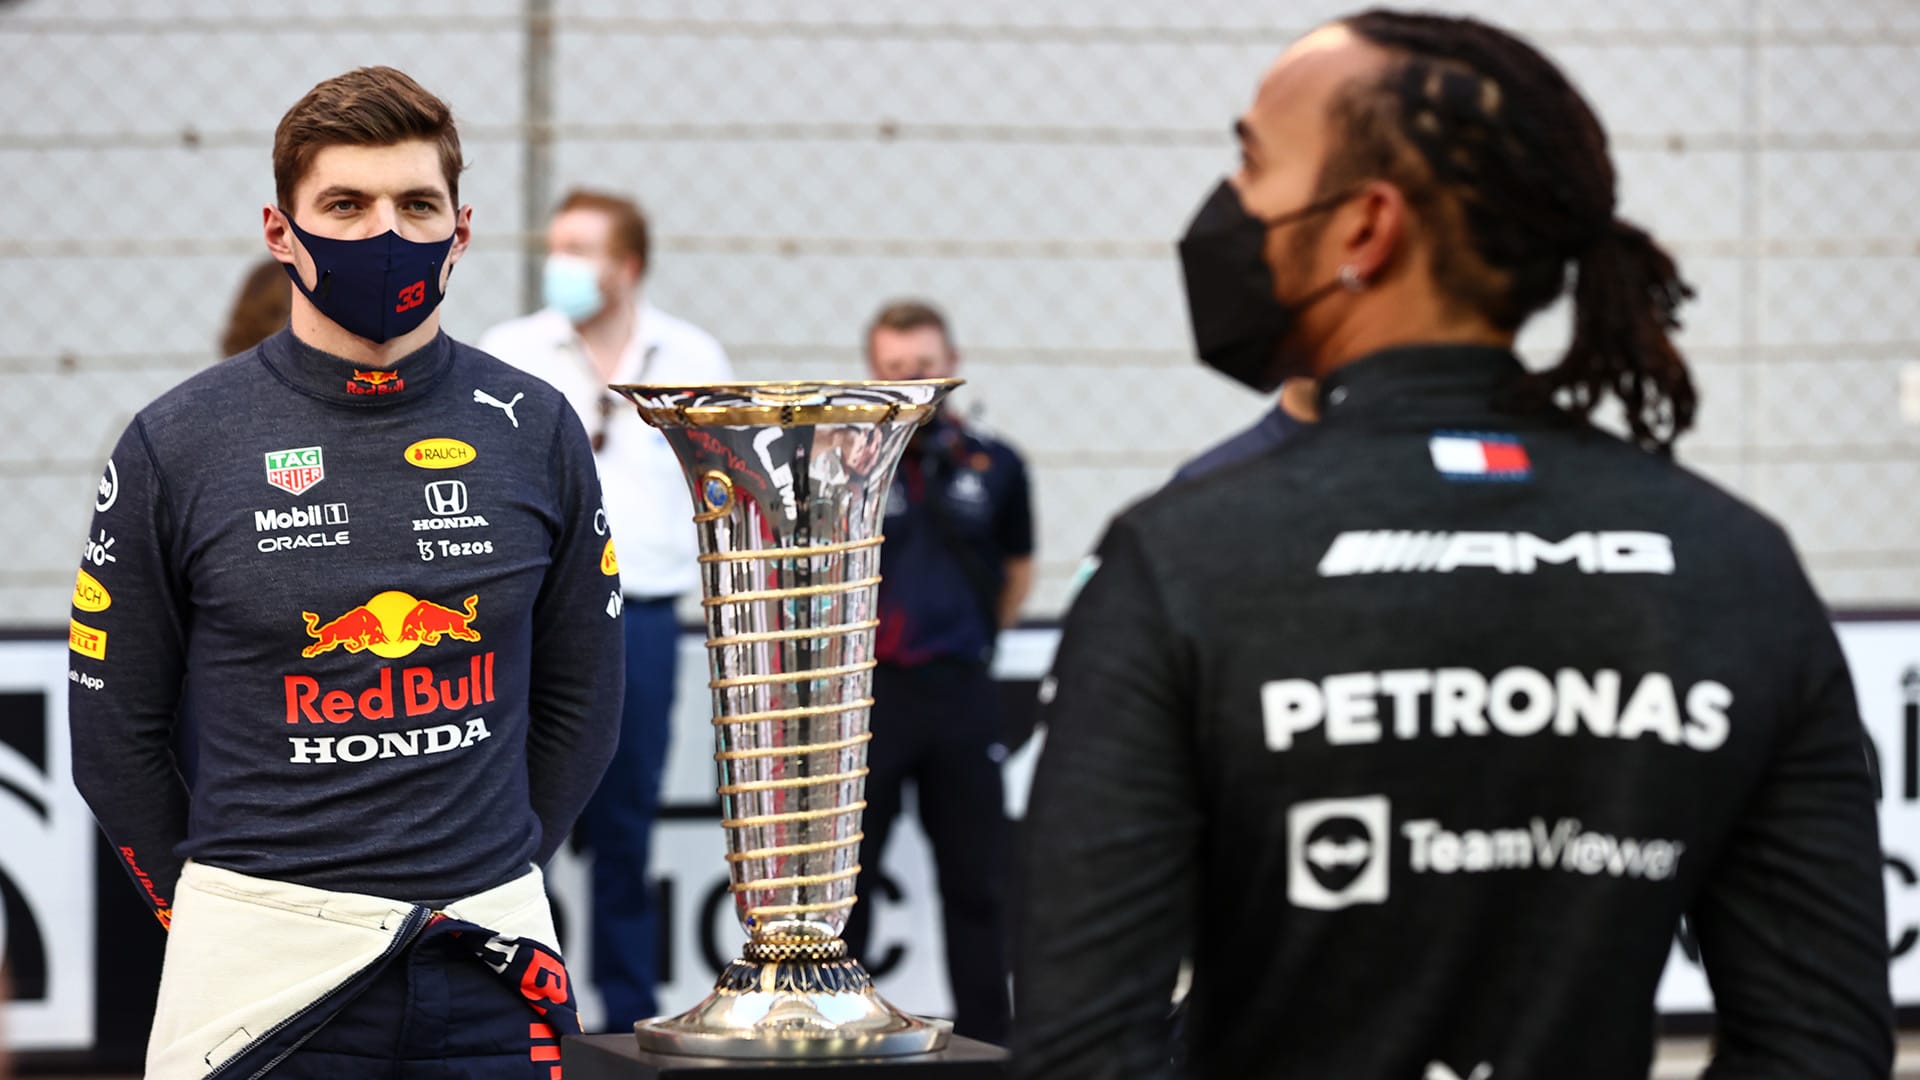 The 9 Times the F1 Drivers' Championship Was Decided By 1 Point